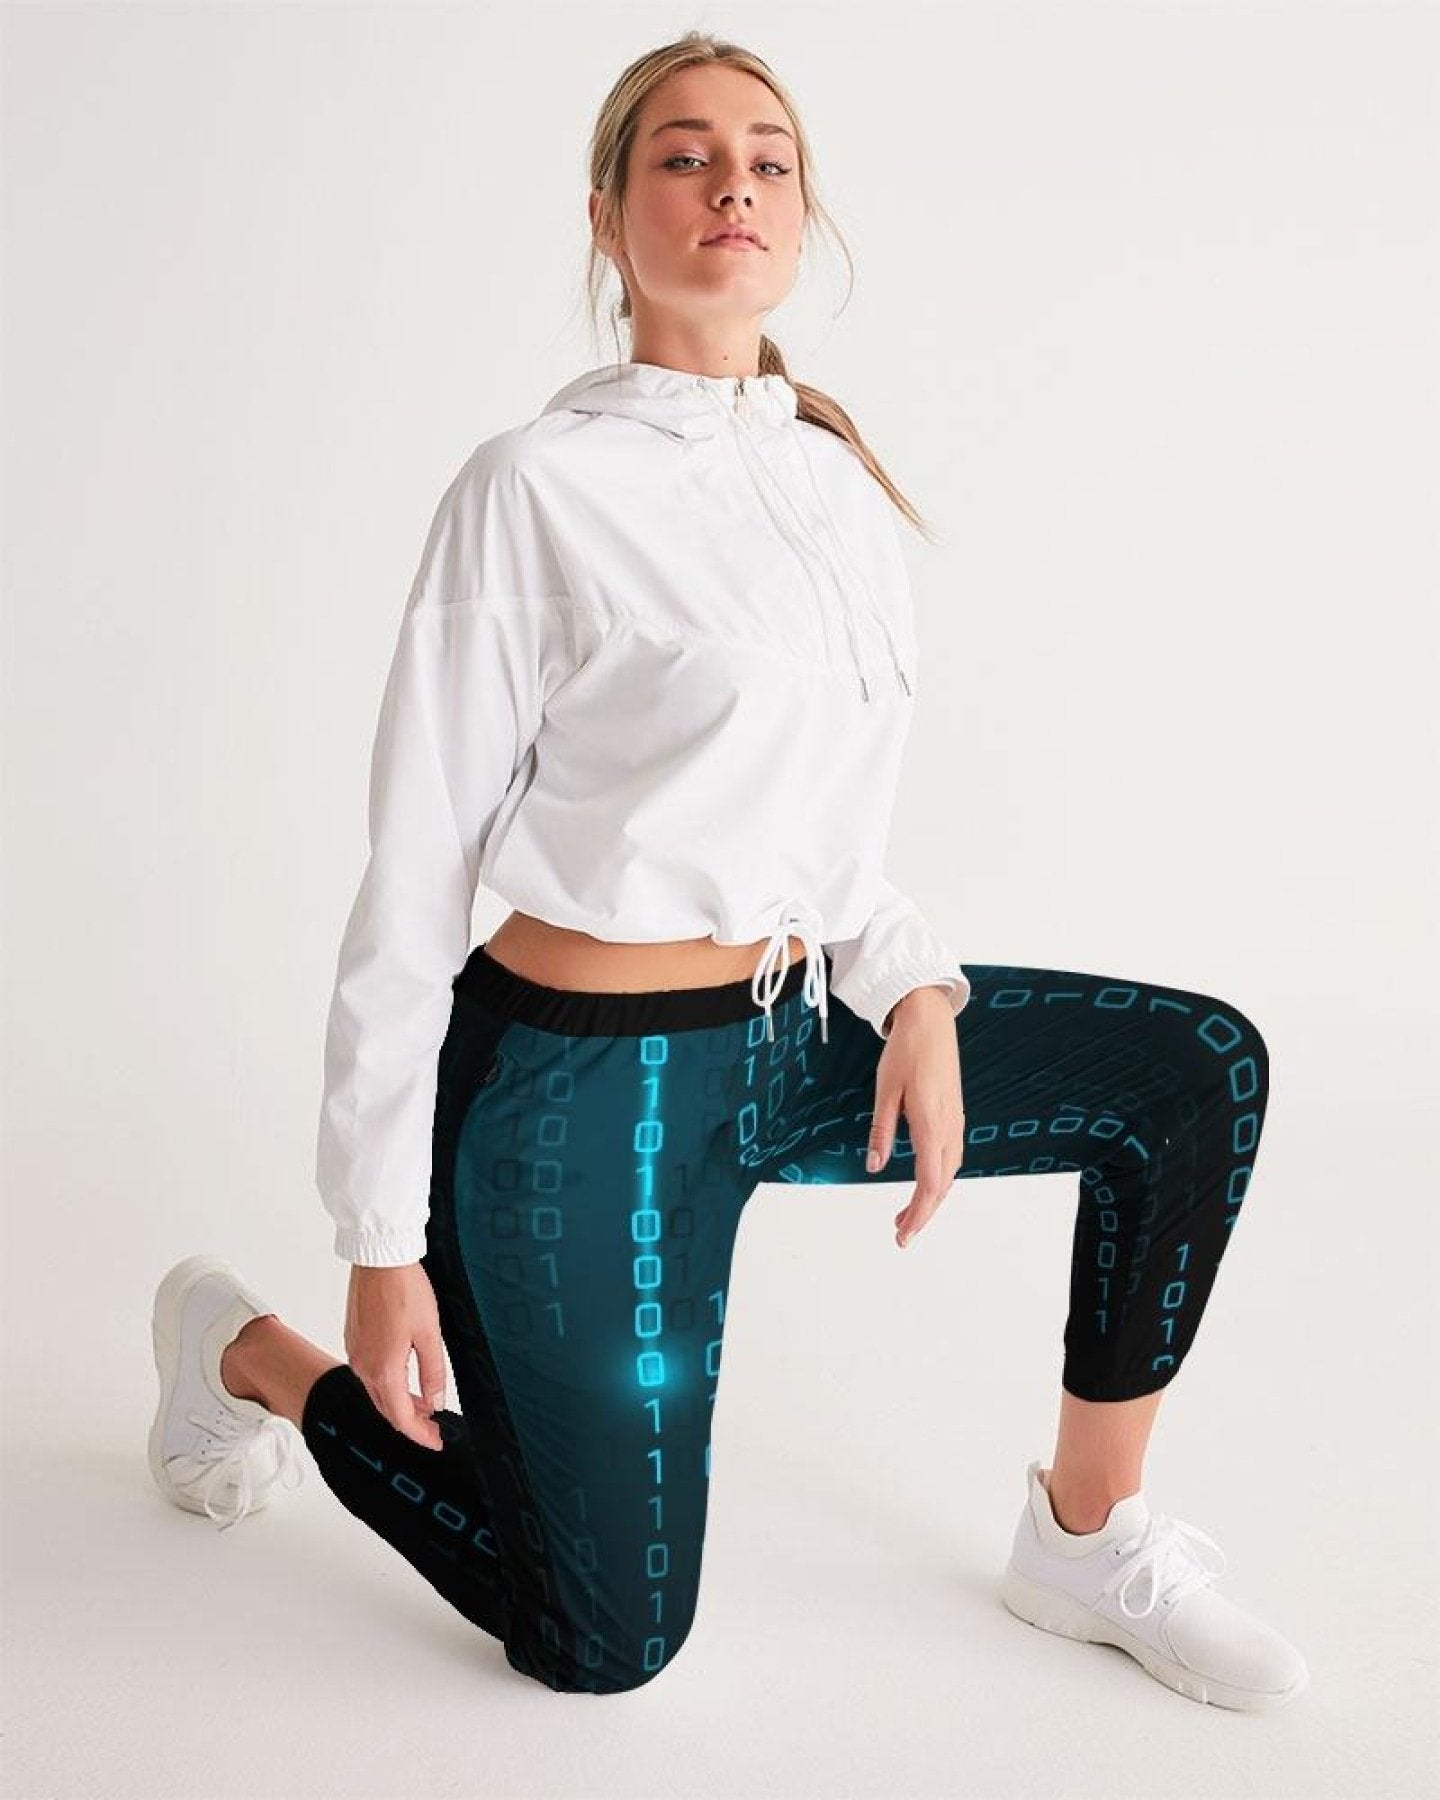 Elevate your active wardrobe with our Harley Track Pants. Discover comfort and style in our collection of women's track pants designed for your active lifestyle.